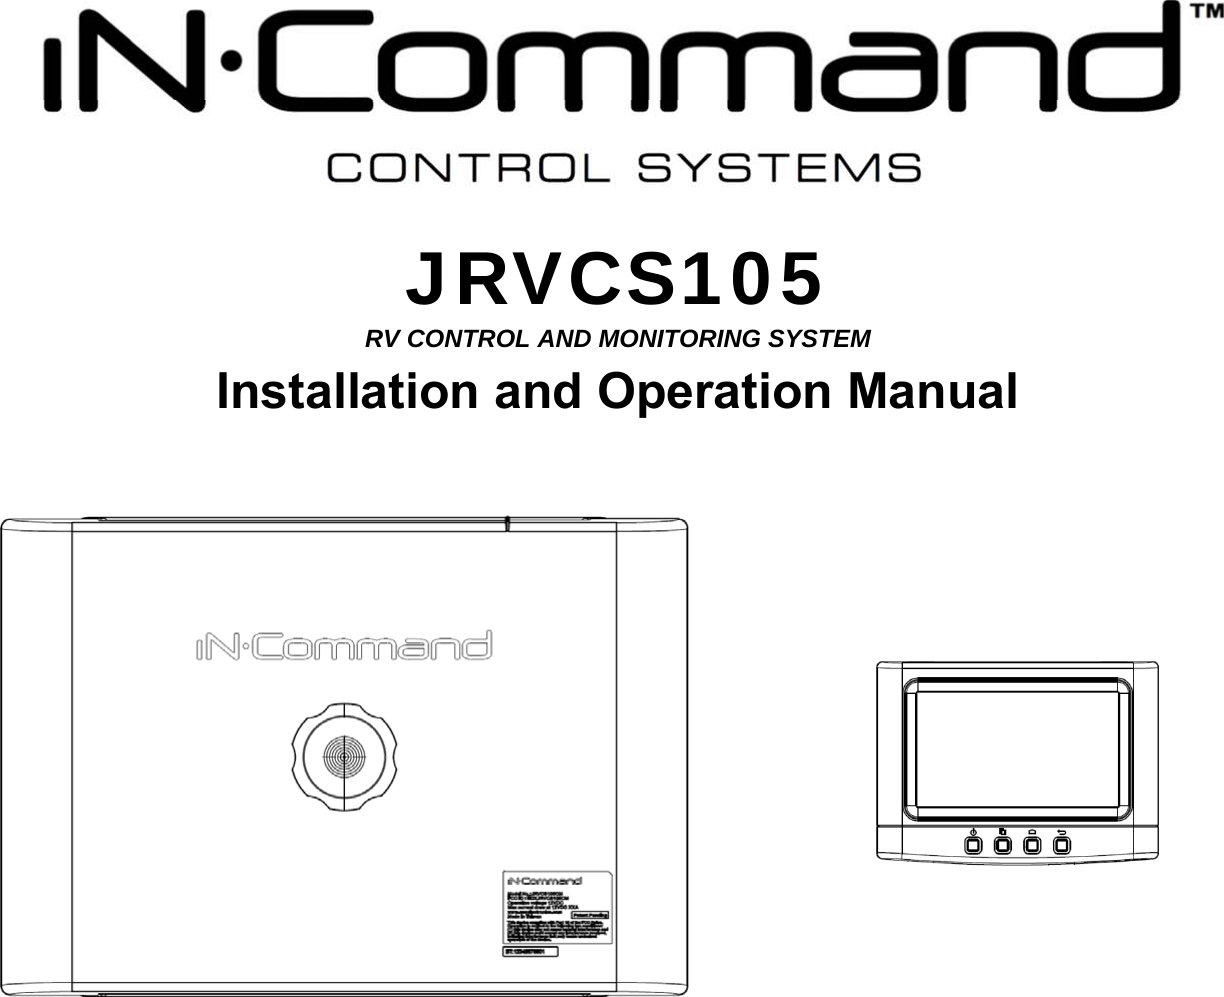  JRVCS105 RV CONTROL AND MONITORING SYSTEM Installation and Operation Manual                